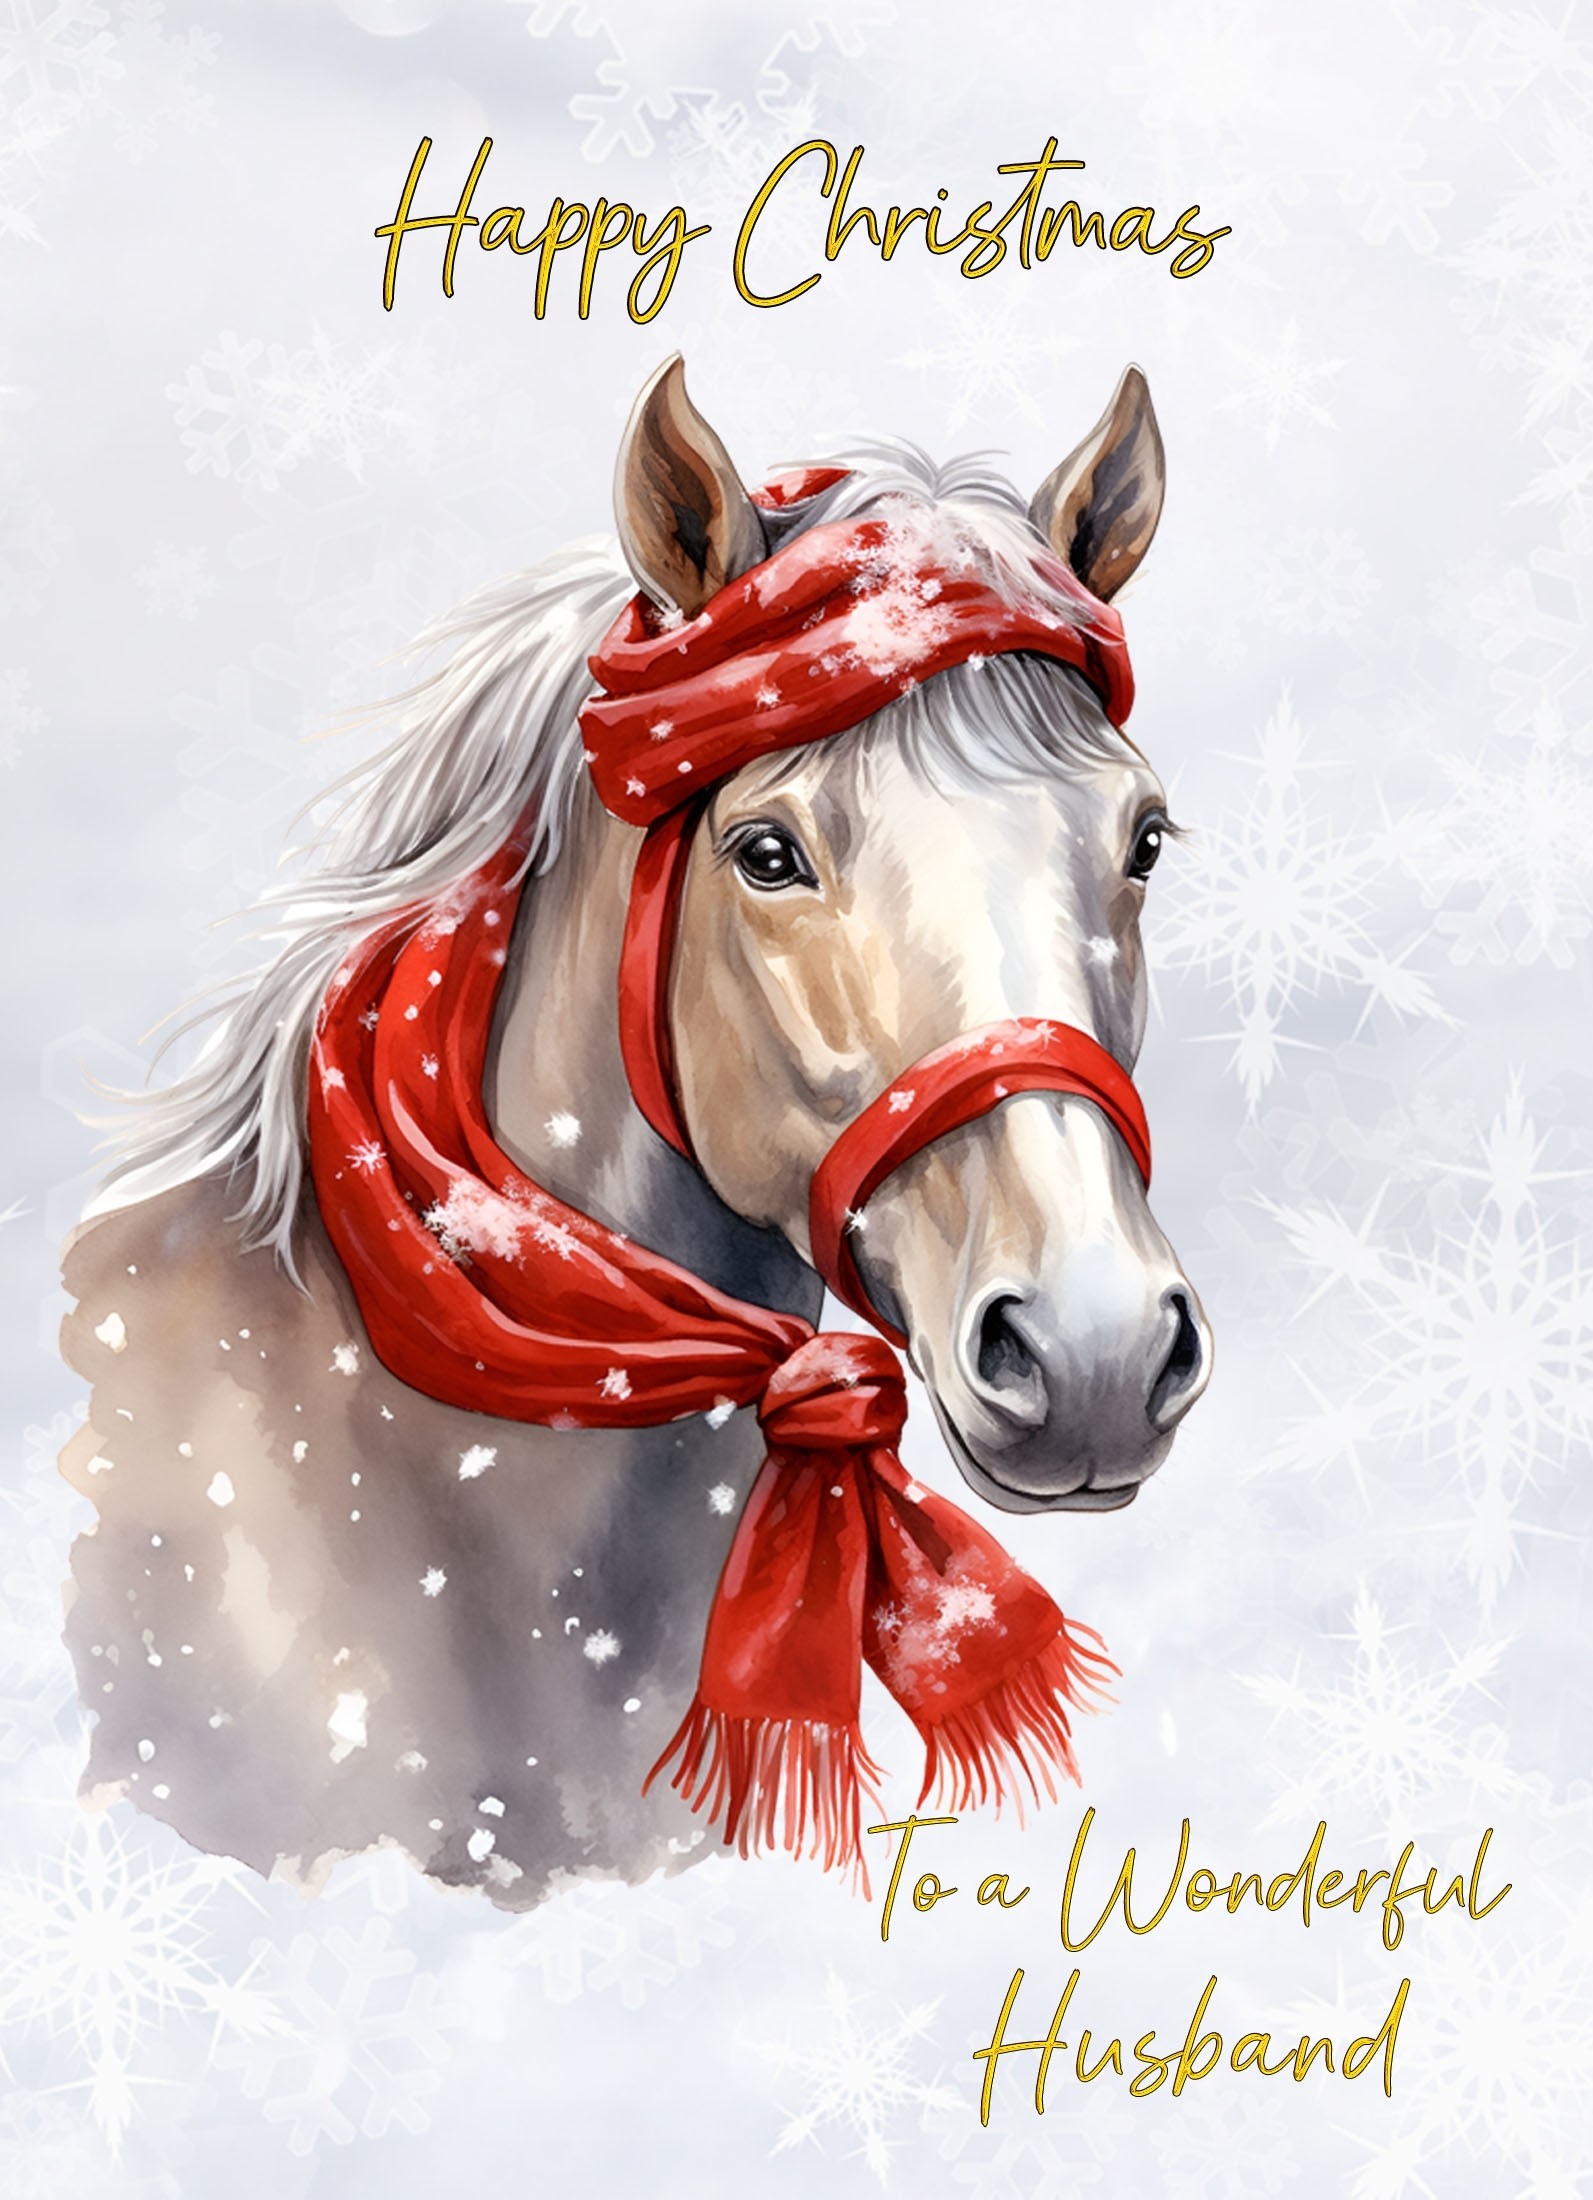 Christmas Card For Husband (Horse Art Red)